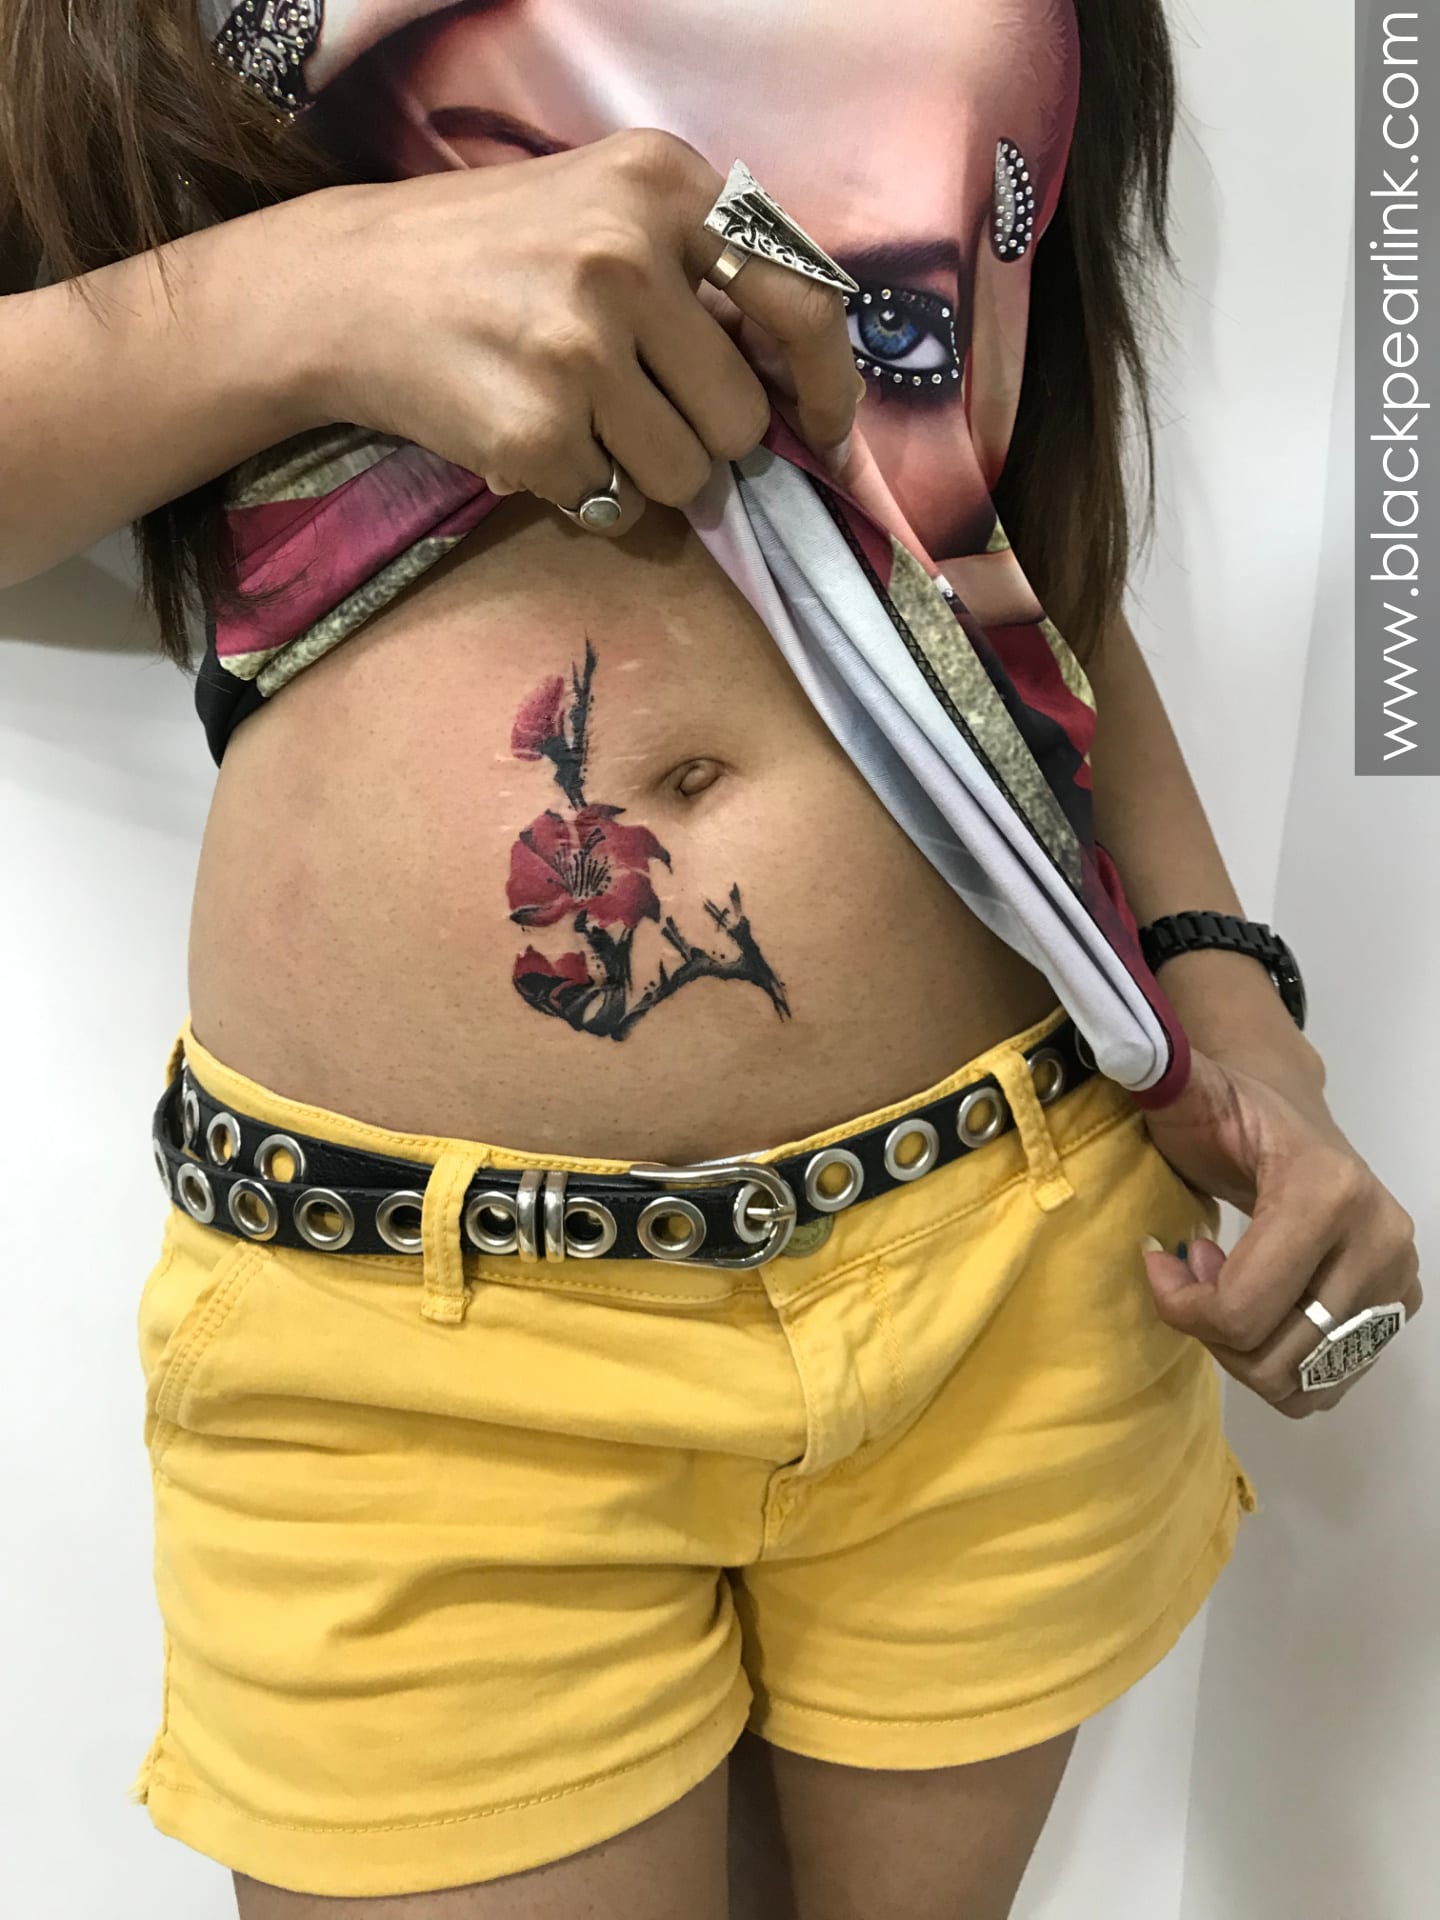 Tummy Tuck Tattoo: What You Need to Know | Art and Design